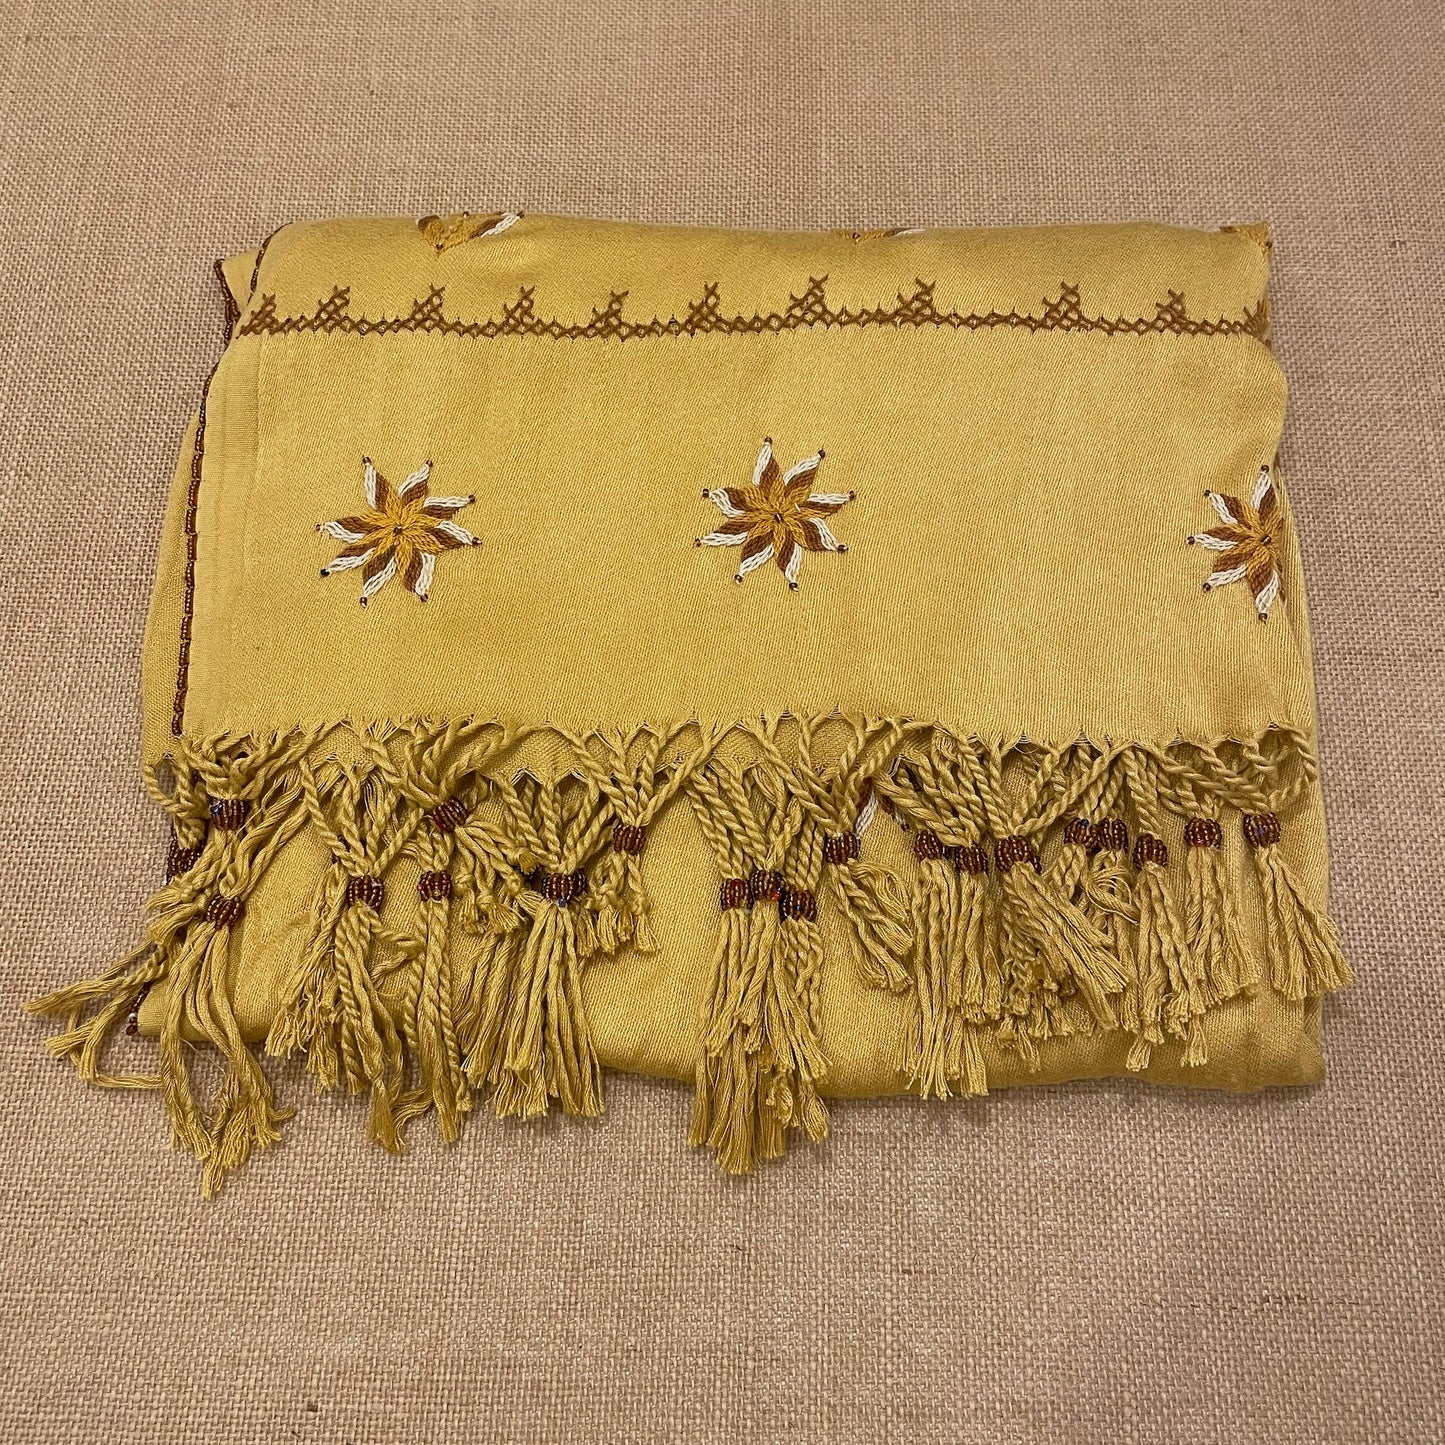 Bedouin Hand-embroidered Golden Beige Pashmina Scarf folded